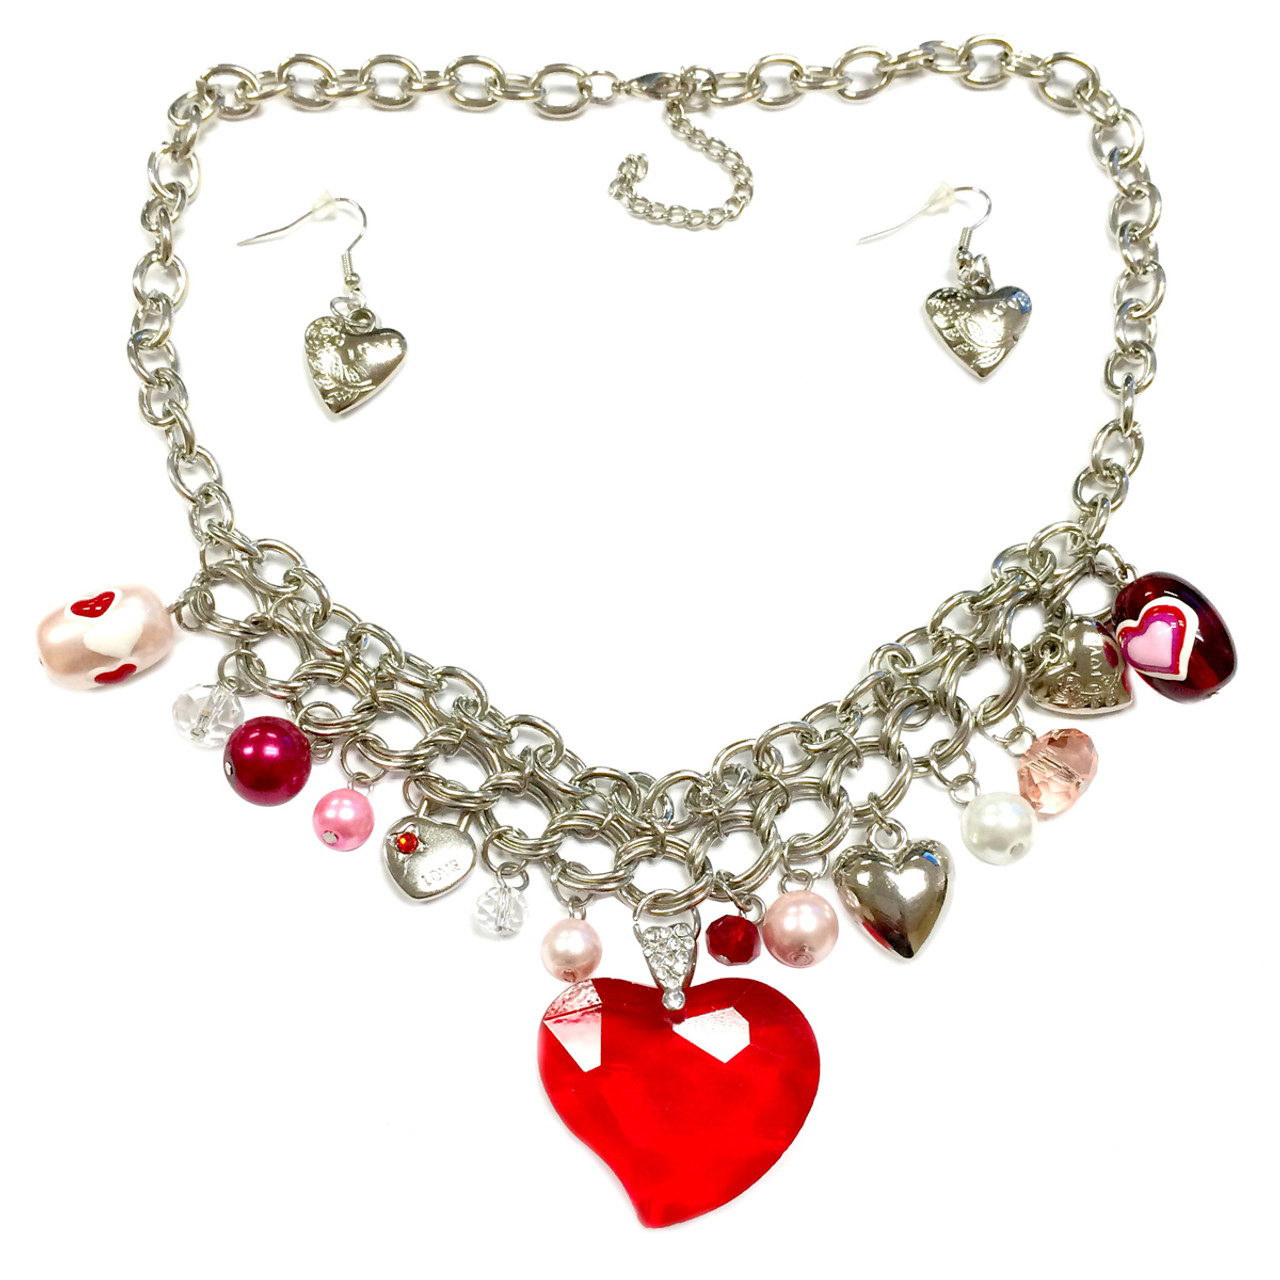 Fiona Big Faceted Red Heart Crystal Pendant with All Charms Wide Choker Necklace with Heart Earrings Set